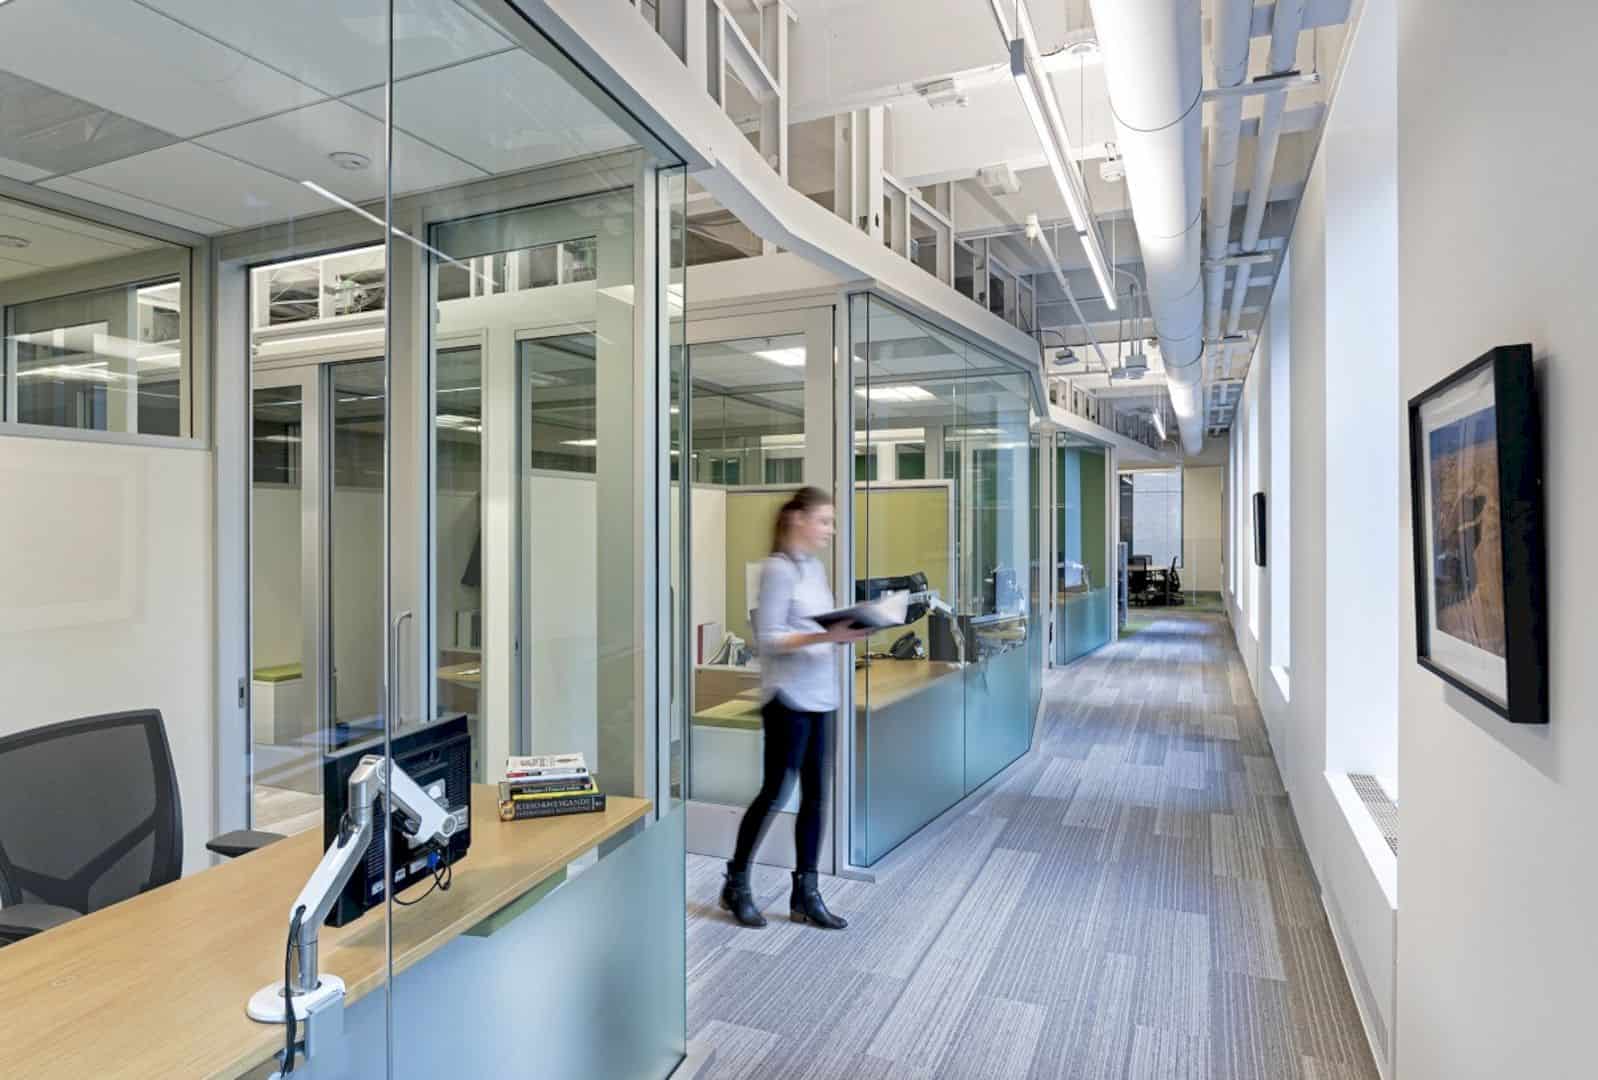 New Resource Bank Promotes Sustainability Through Leed Gold Office Design 8